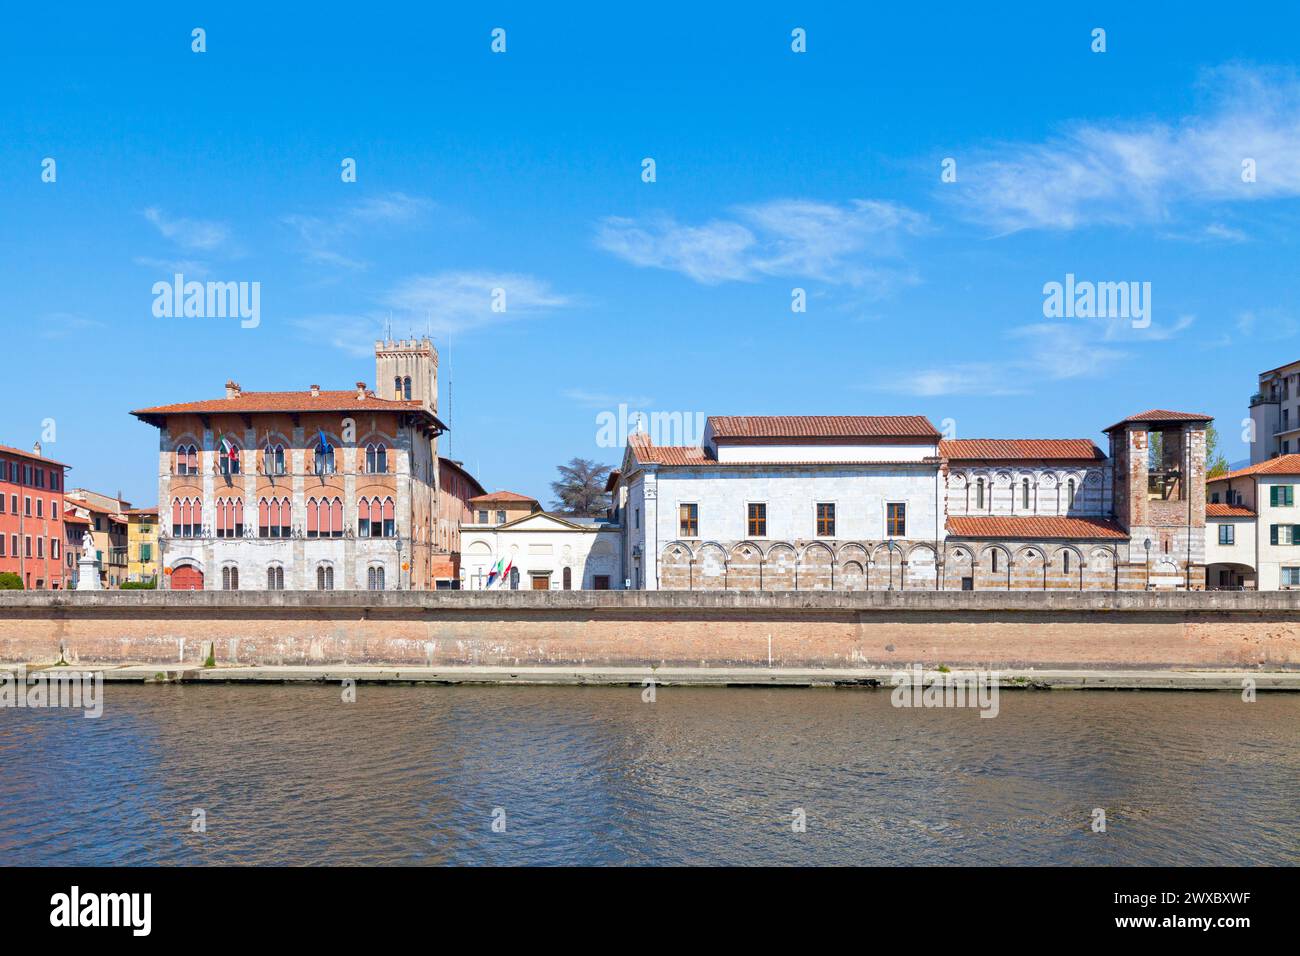 Pisa, Italy - March 31 2019: The Palazzo Vecchio de’ Medici, the National Museum of San Matteo and the Church and convent of San Matteo alongside the Stock Photo